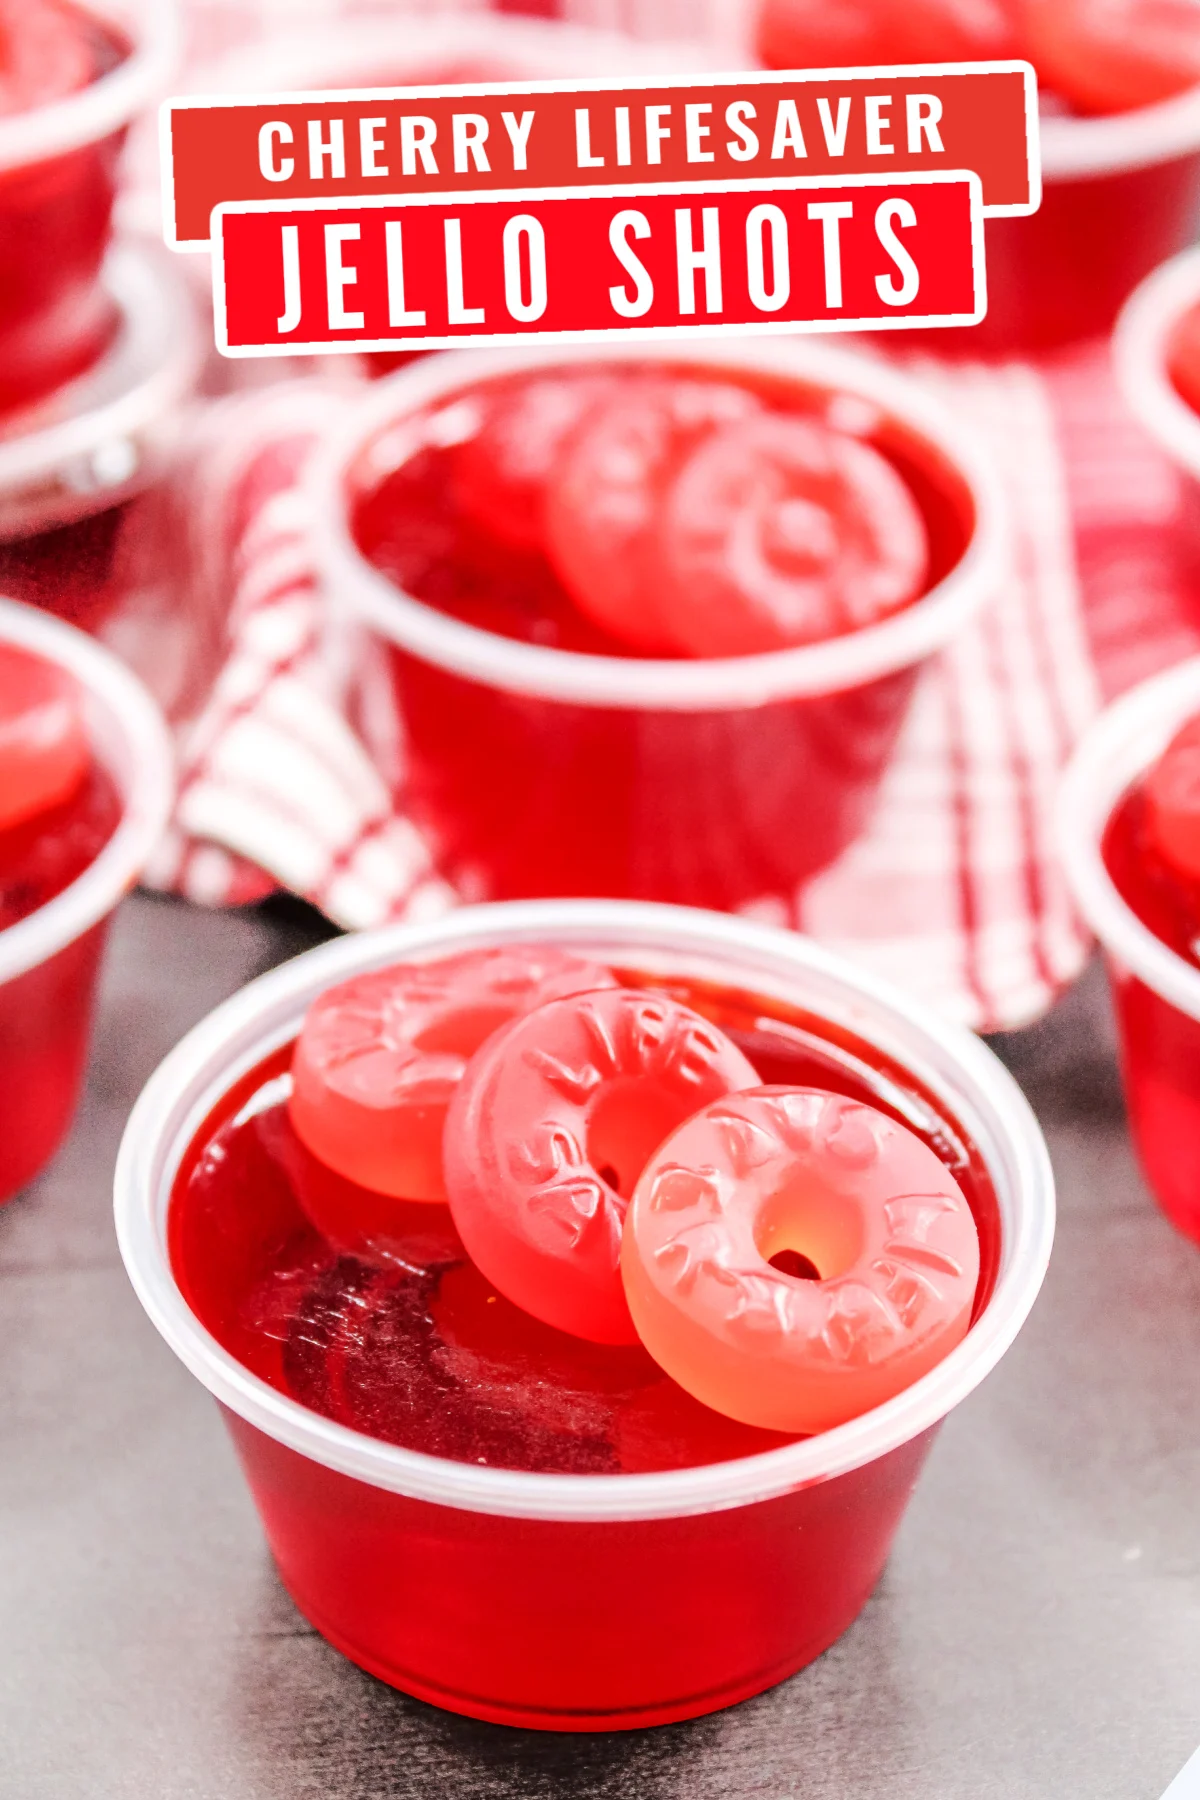 Love cherry lifesavers? Then you'll love this delicious cherry lifesaver jello shots recipe! Perfect for parties, they are sure to be a hit!